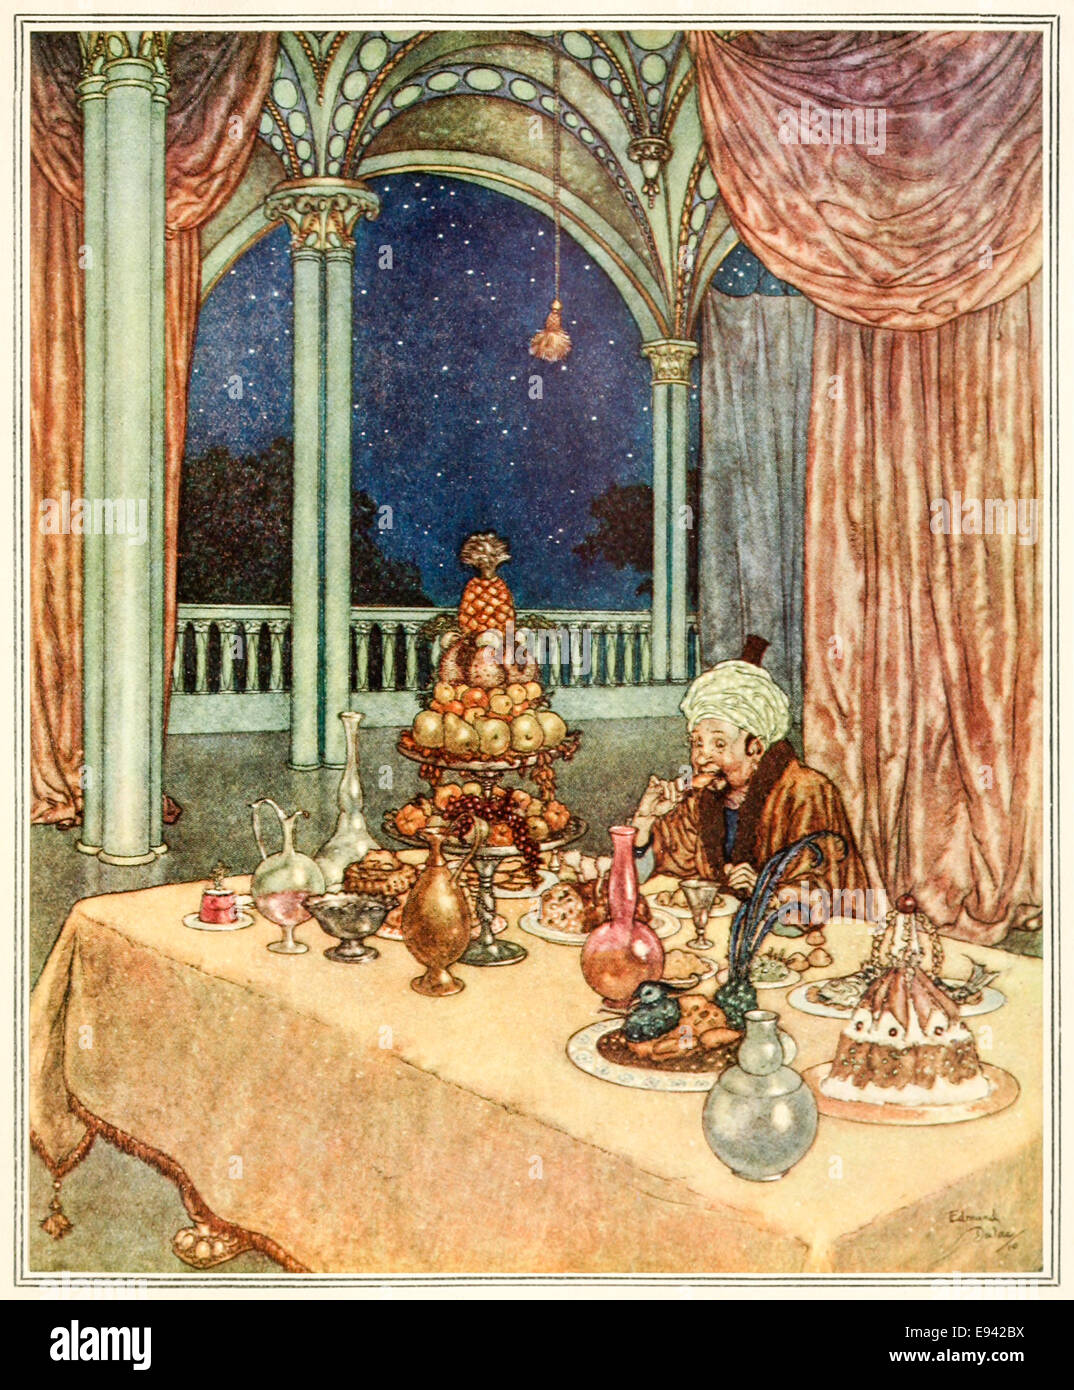 Beauty & the Beast, Edmund Dulac illustration from ‘Sleeping Beauty and other Fairy Tales’. See description for more information Stock Photo